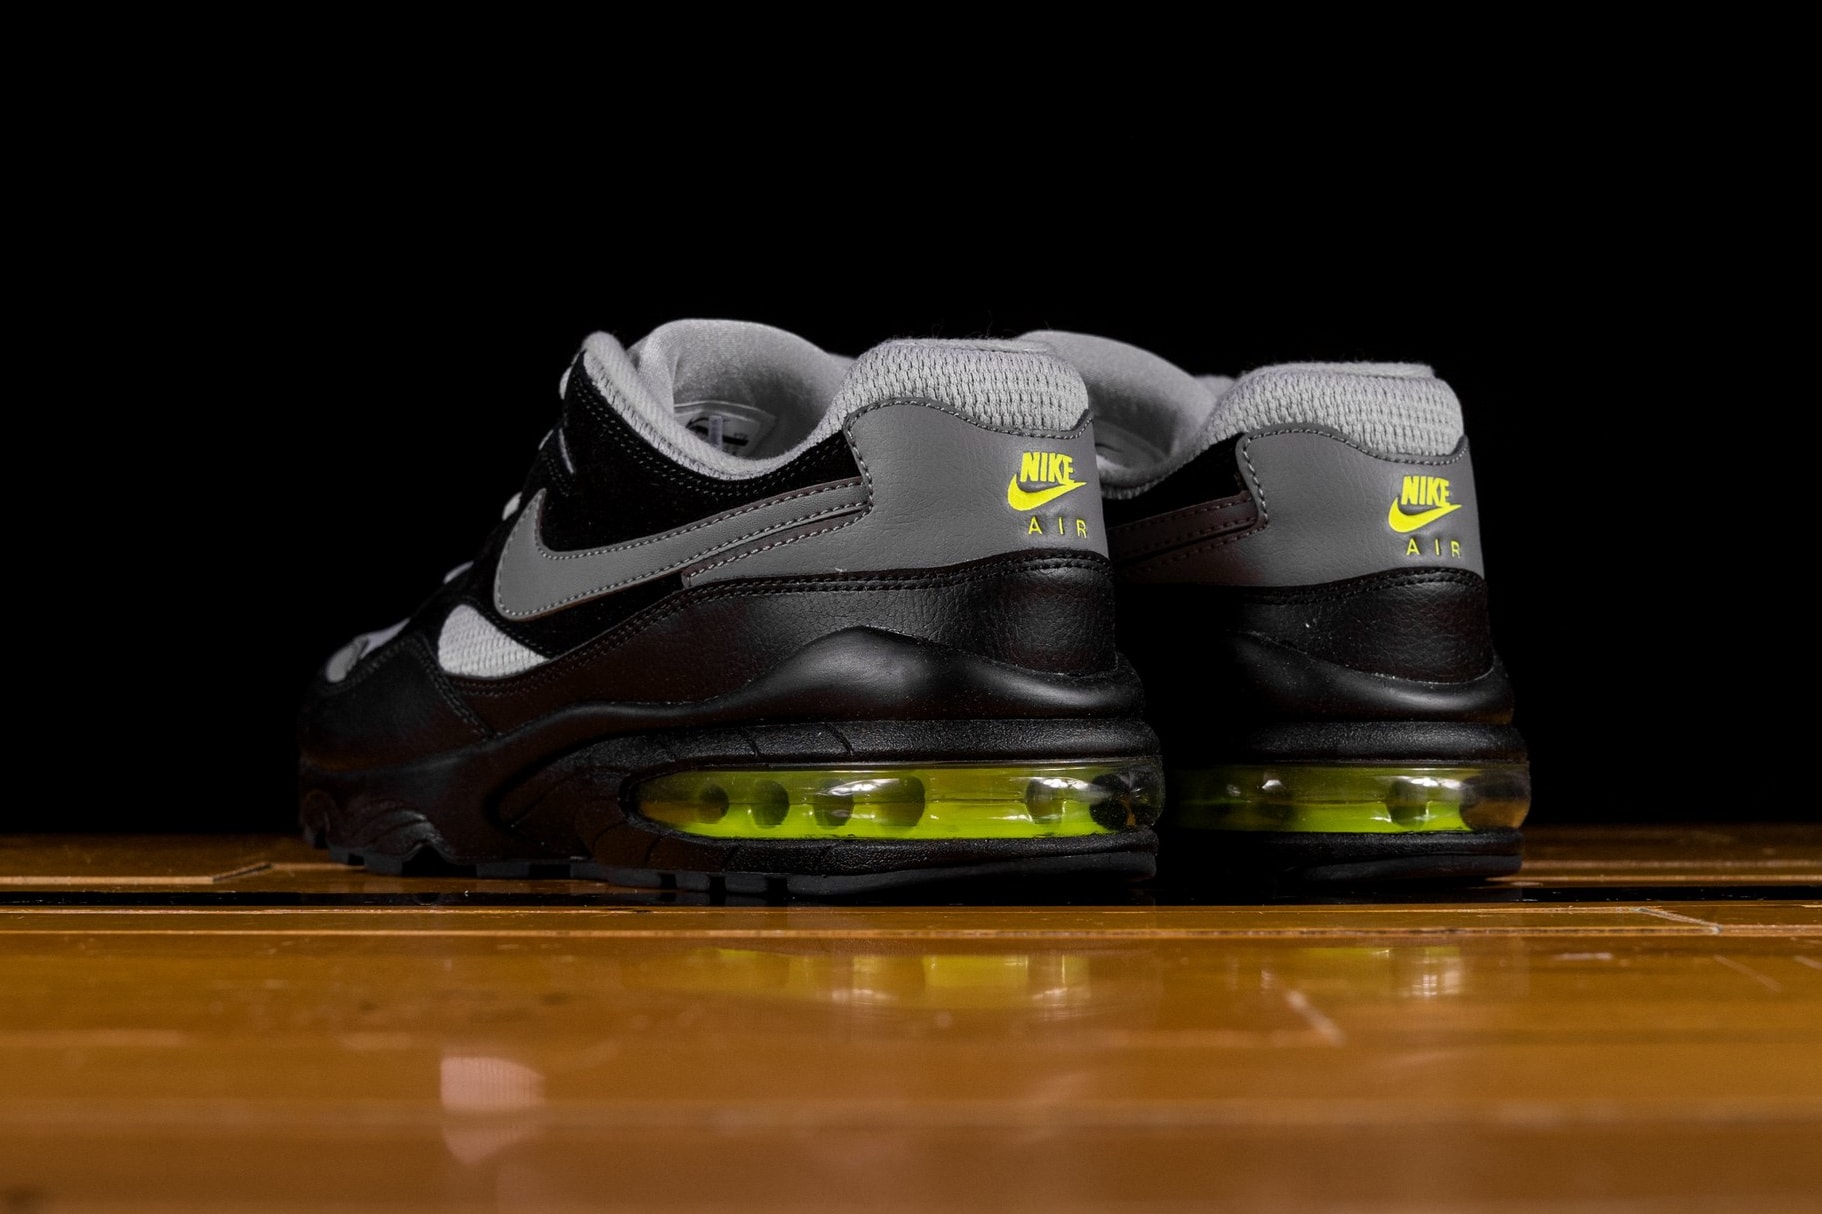 Nike Air Max 94 Wolf Grey Volt Release date info sneaker colorway available now purchase price footwear trainer